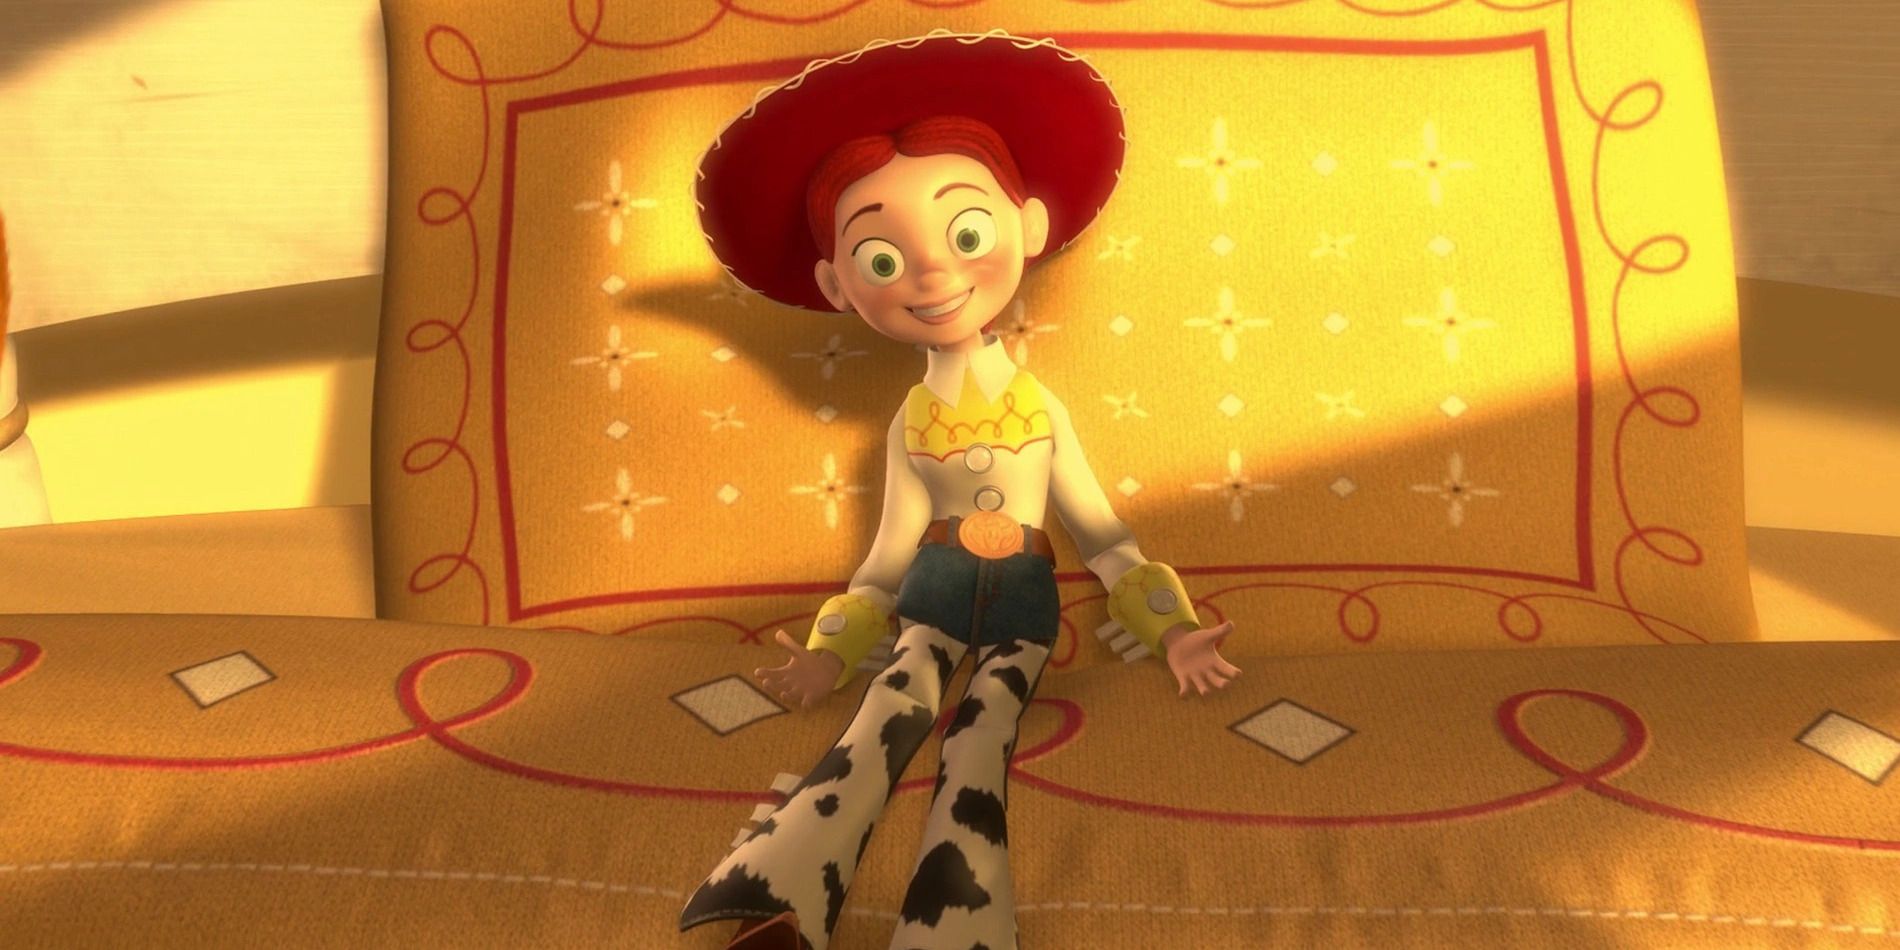 Jessie On Emily's Bed In Toy Story 2 When She Loved Me.jpg